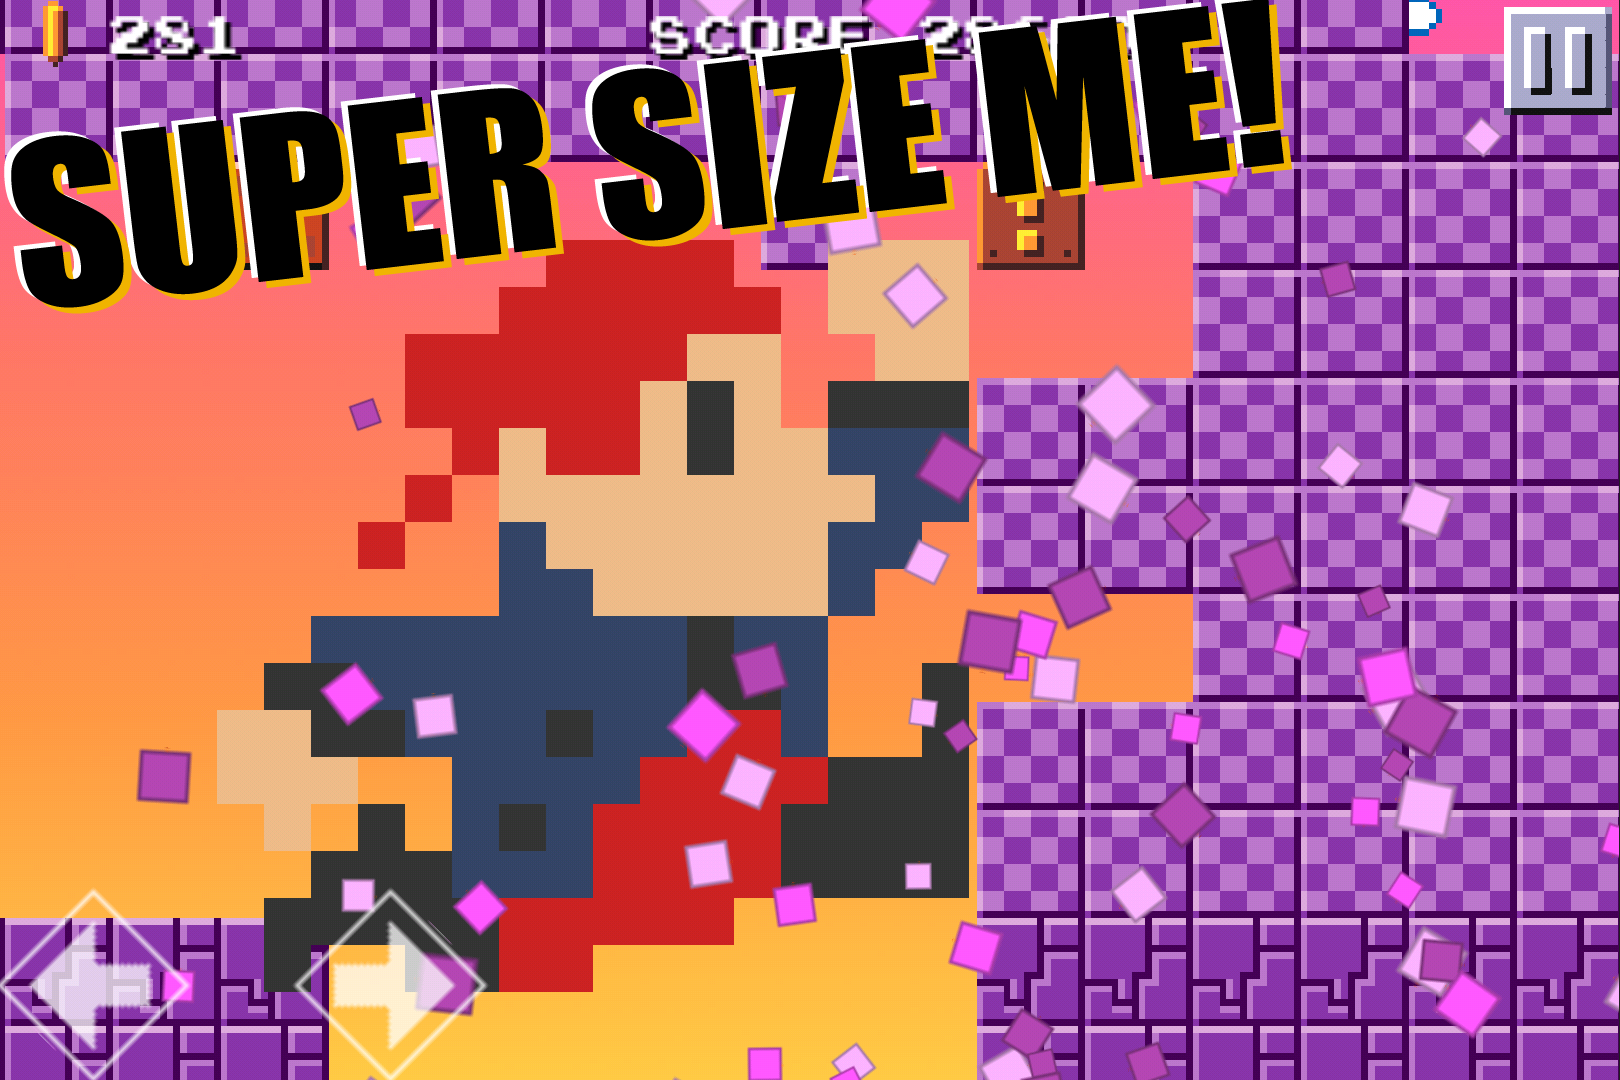 Android application Super Mega Runners : Stage maker Create your game screenshort